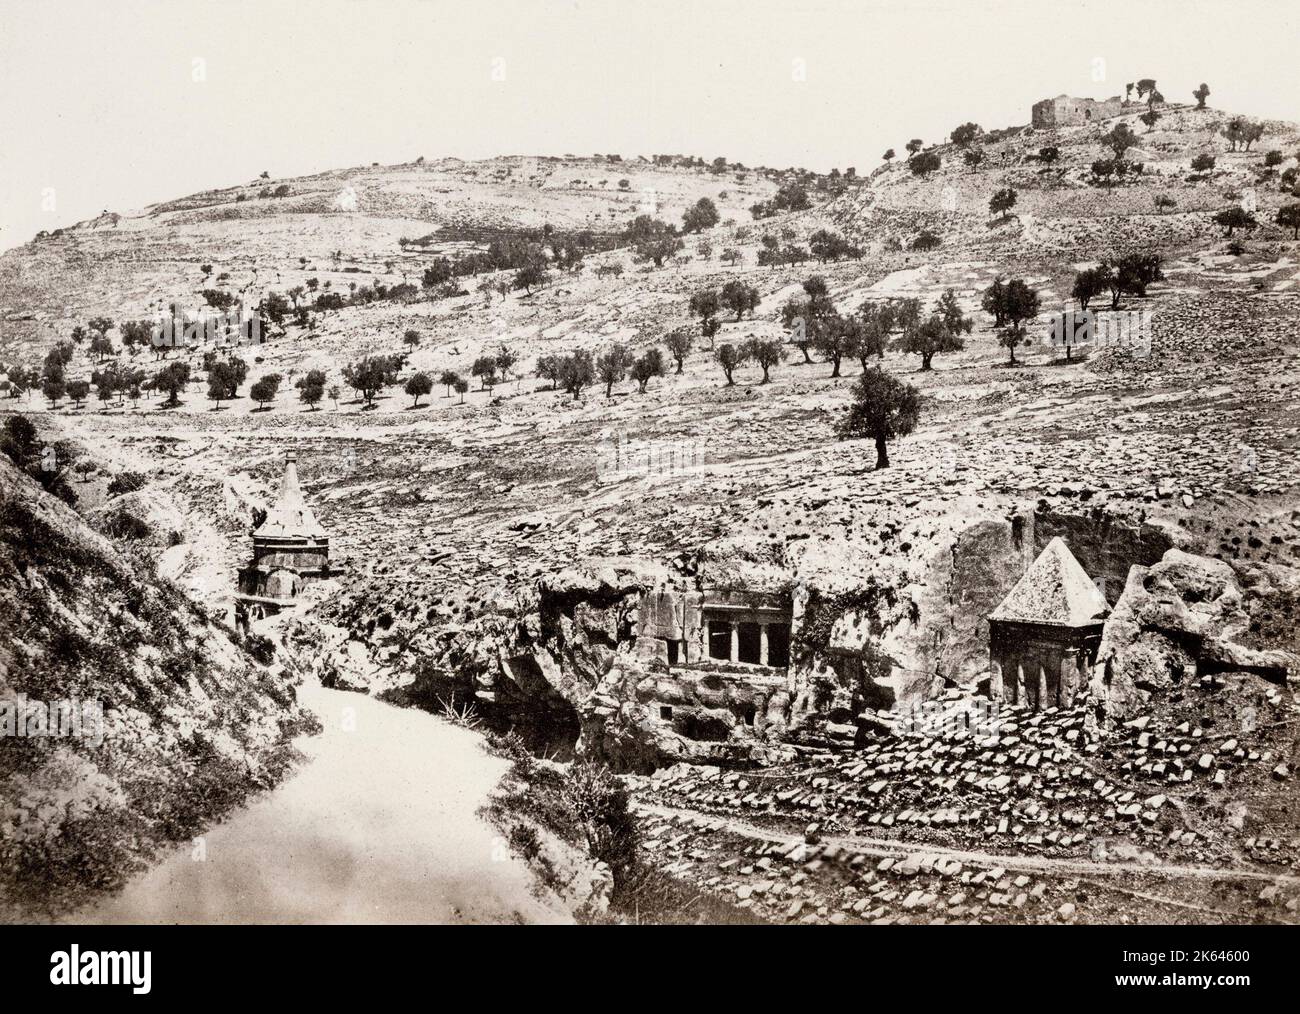 Photograph by Francis Frith, from his trip to Egypt, Palestine and the wider Holy lands in 1857 - the valley of Jehoshaphat, Jerusalem. Stock Photo